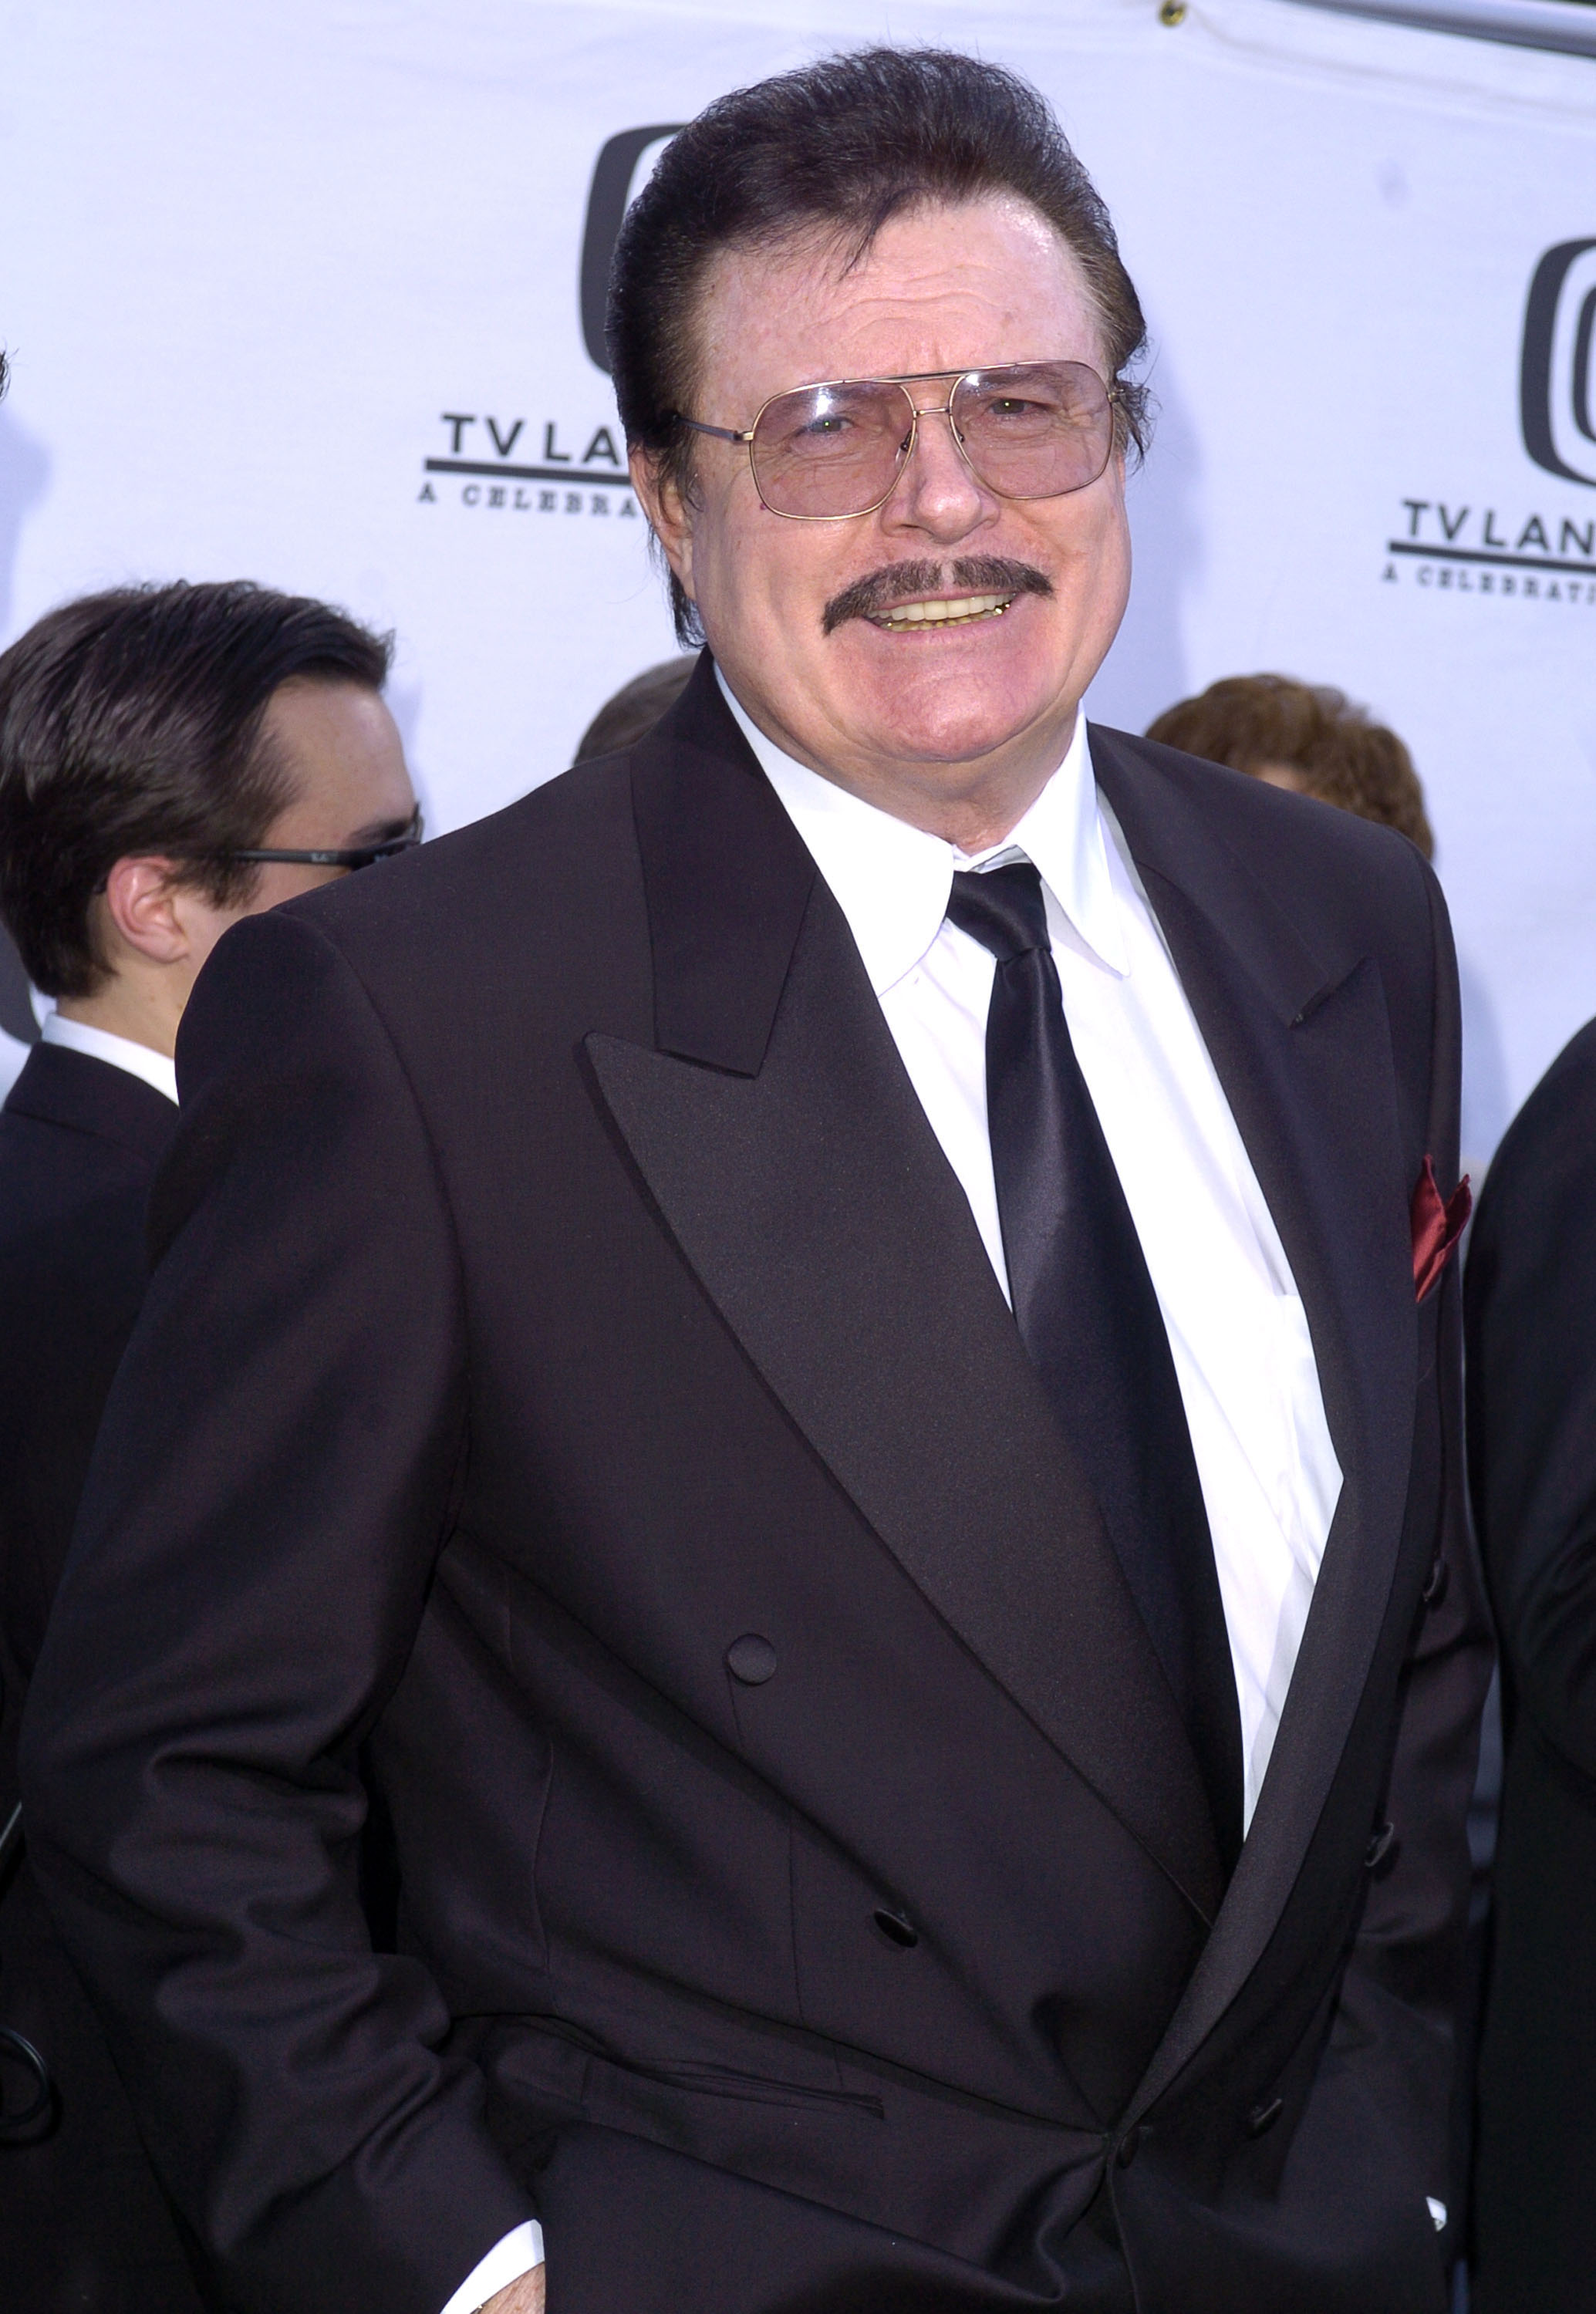 Max Baer Jr. at the  2nd Annual TV Land Awards in 2004. | Source: Getty Images